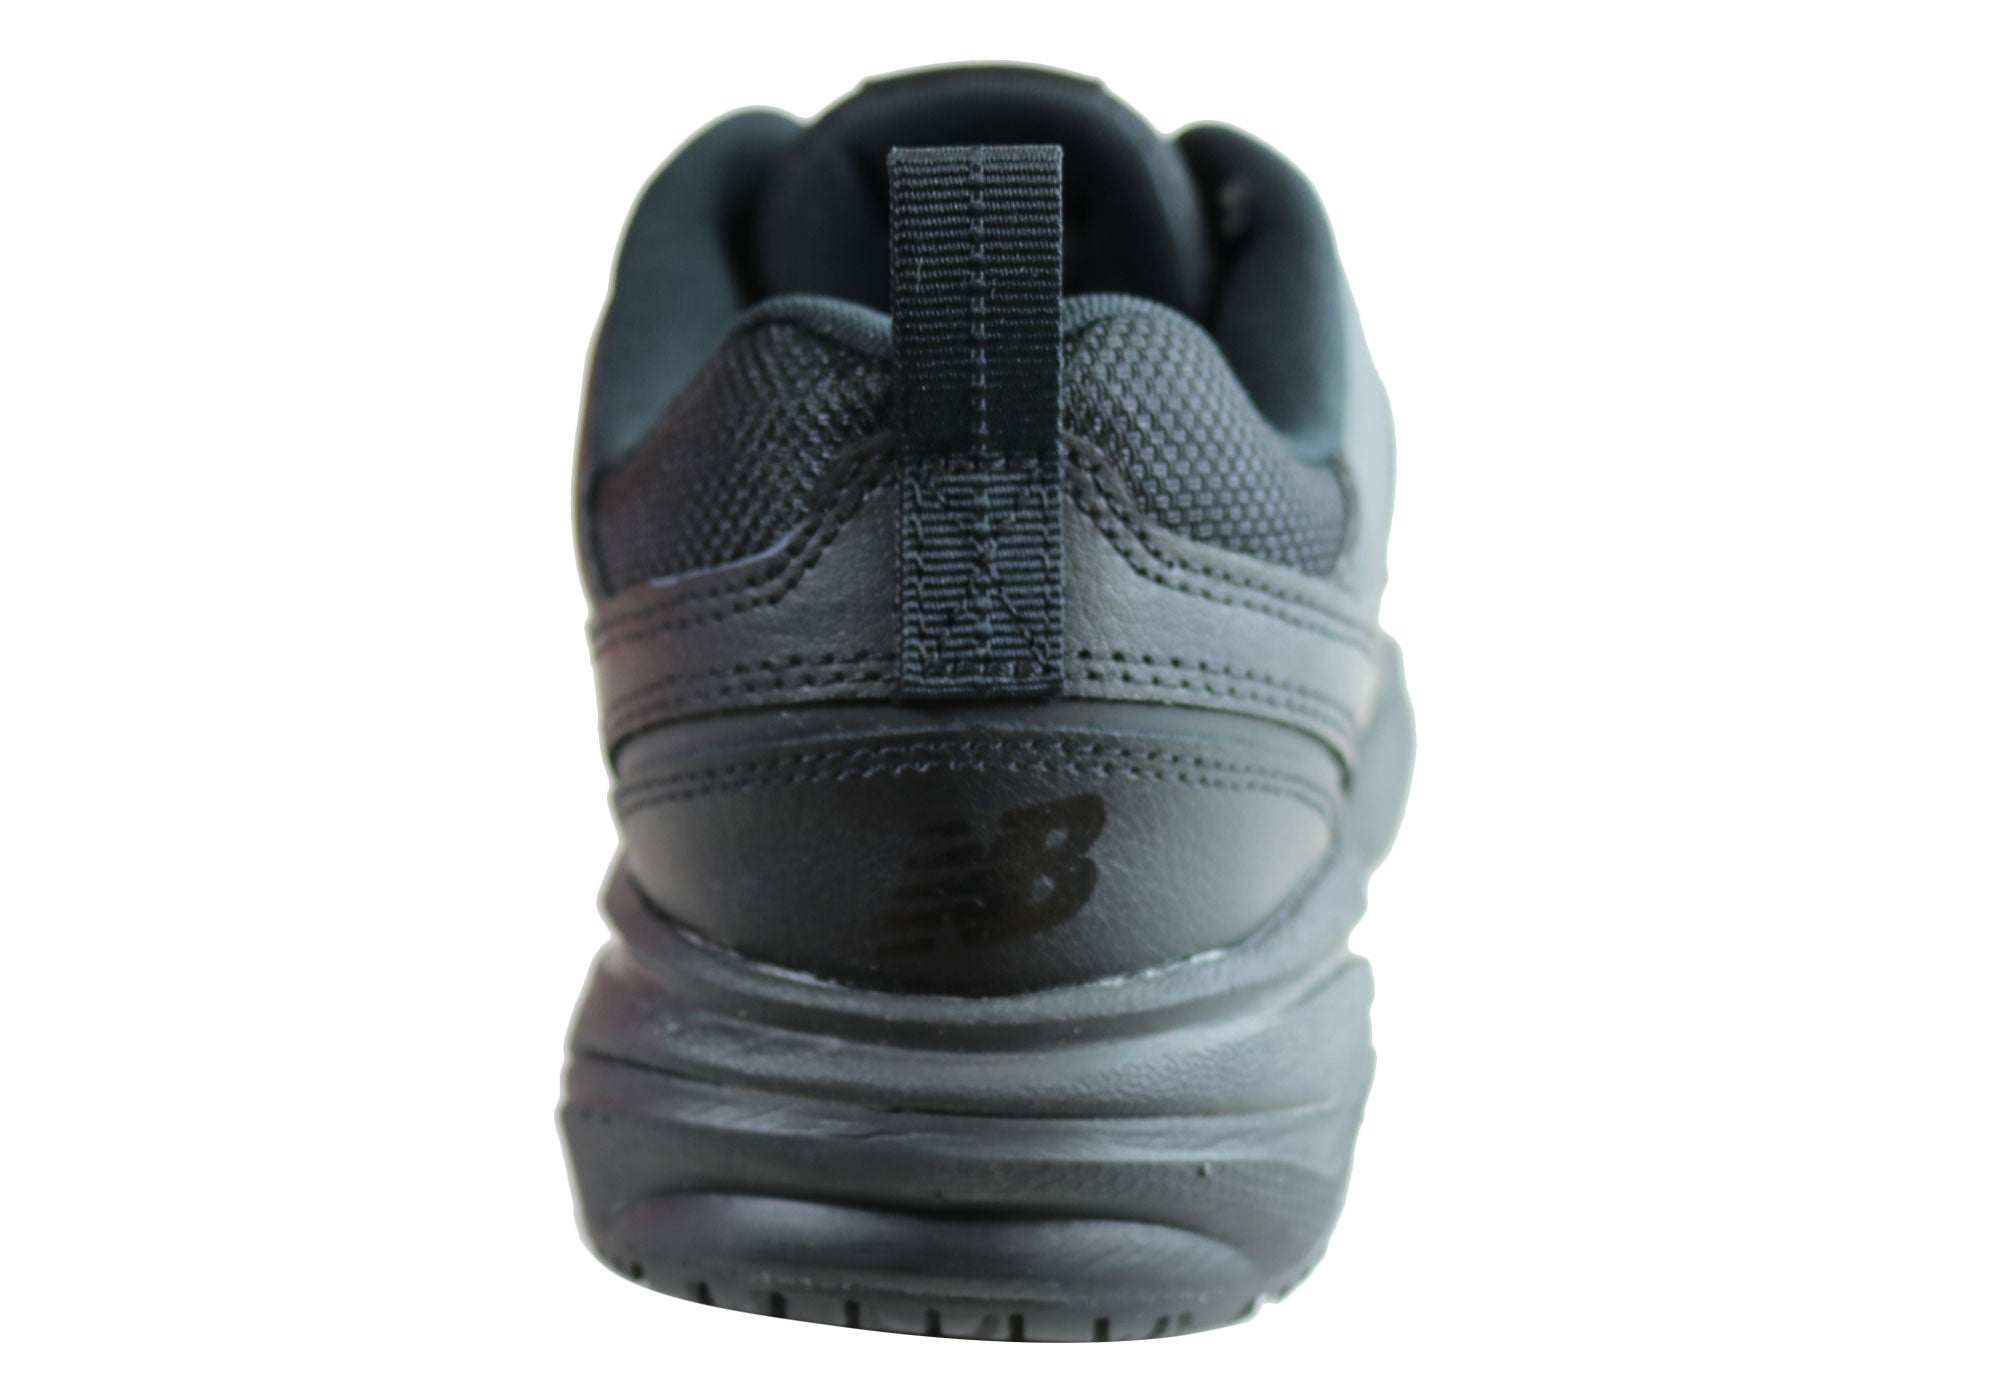 wide fit black work shoes womens